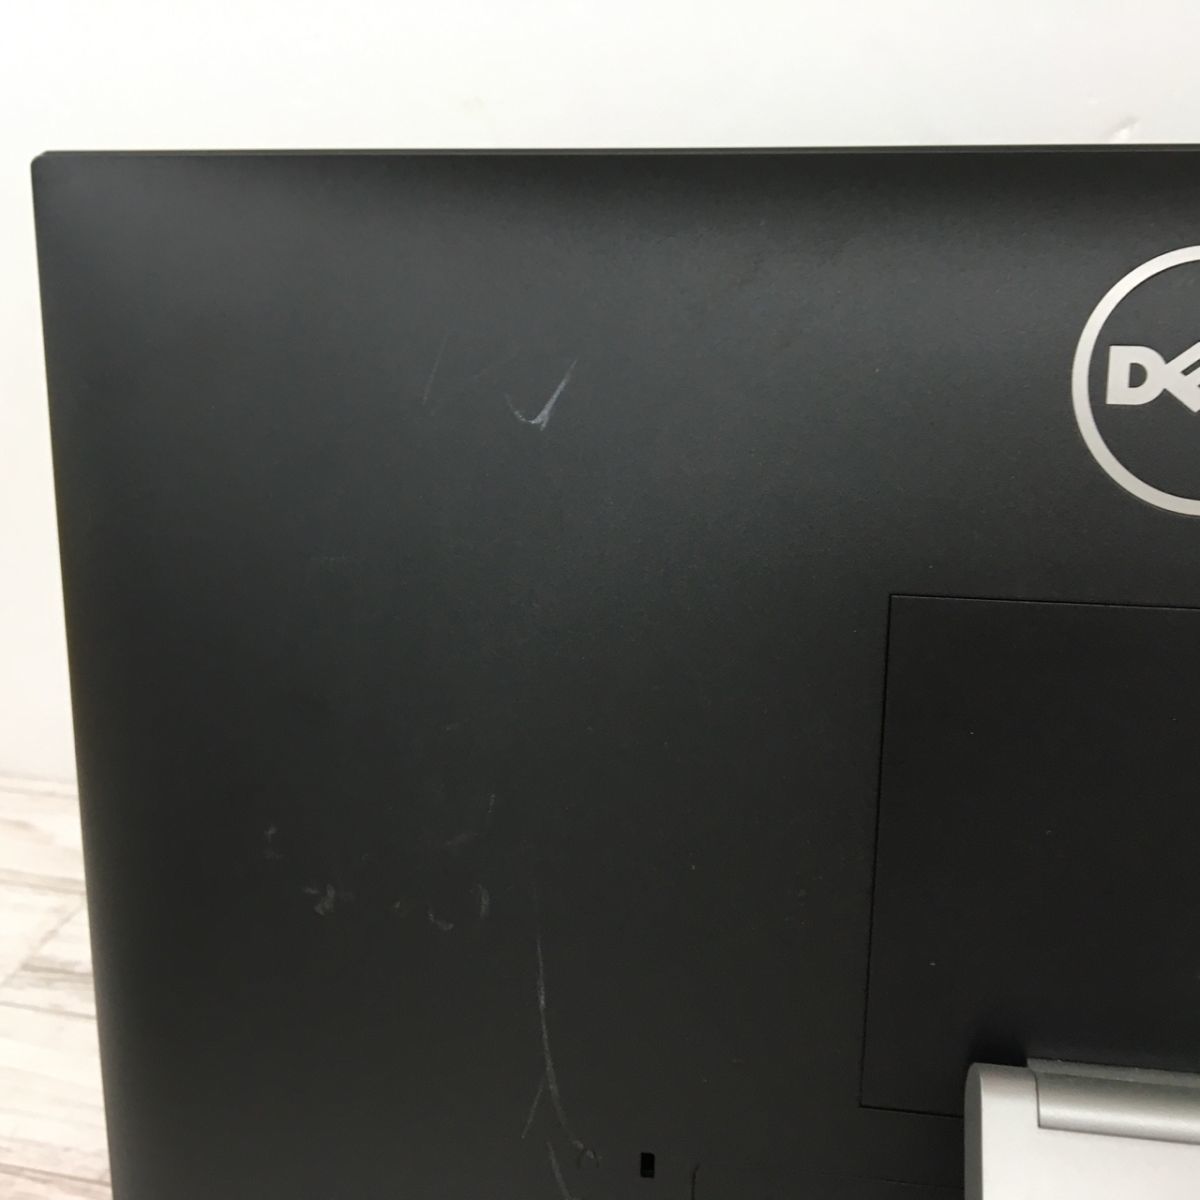 DELL デル 23.8インチ 液晶モニター S2415HB[L5048] item details